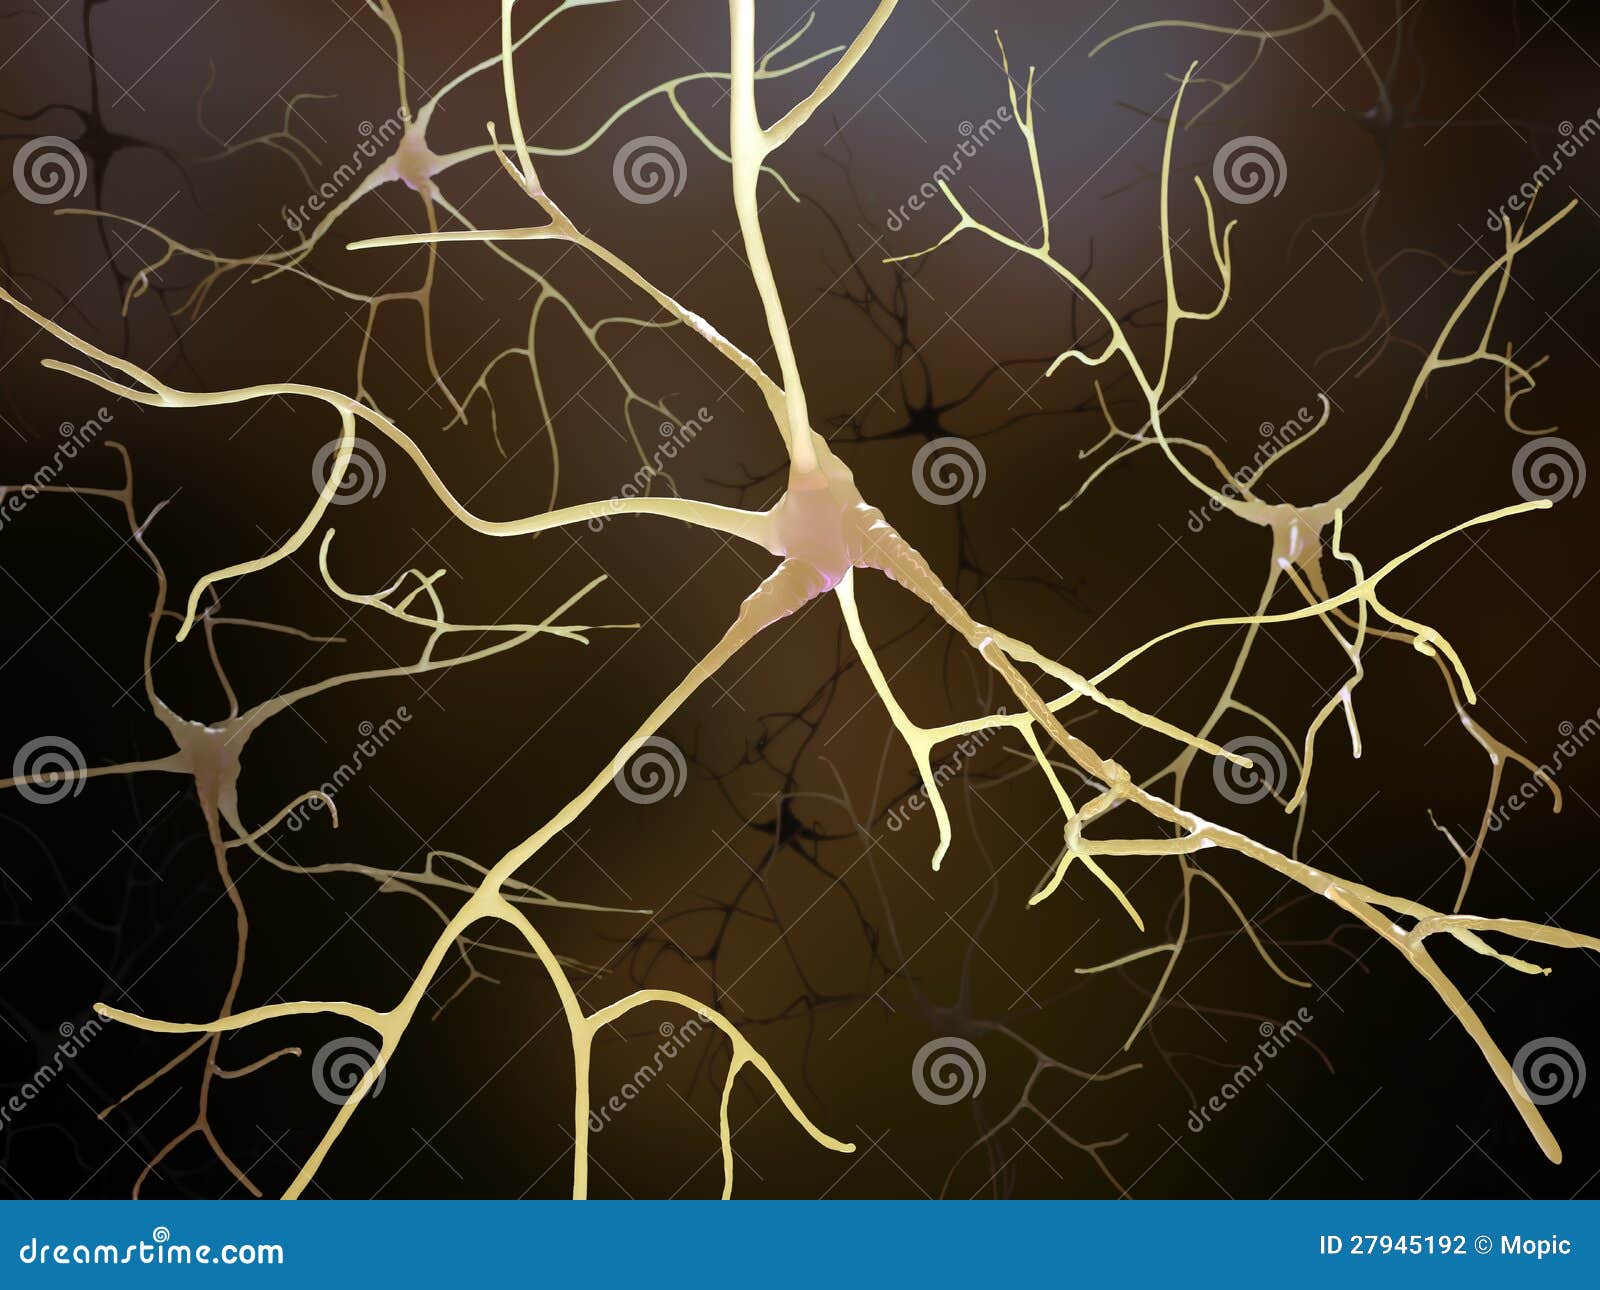 Neuronal Connections Inside The Human Brain Stock ...